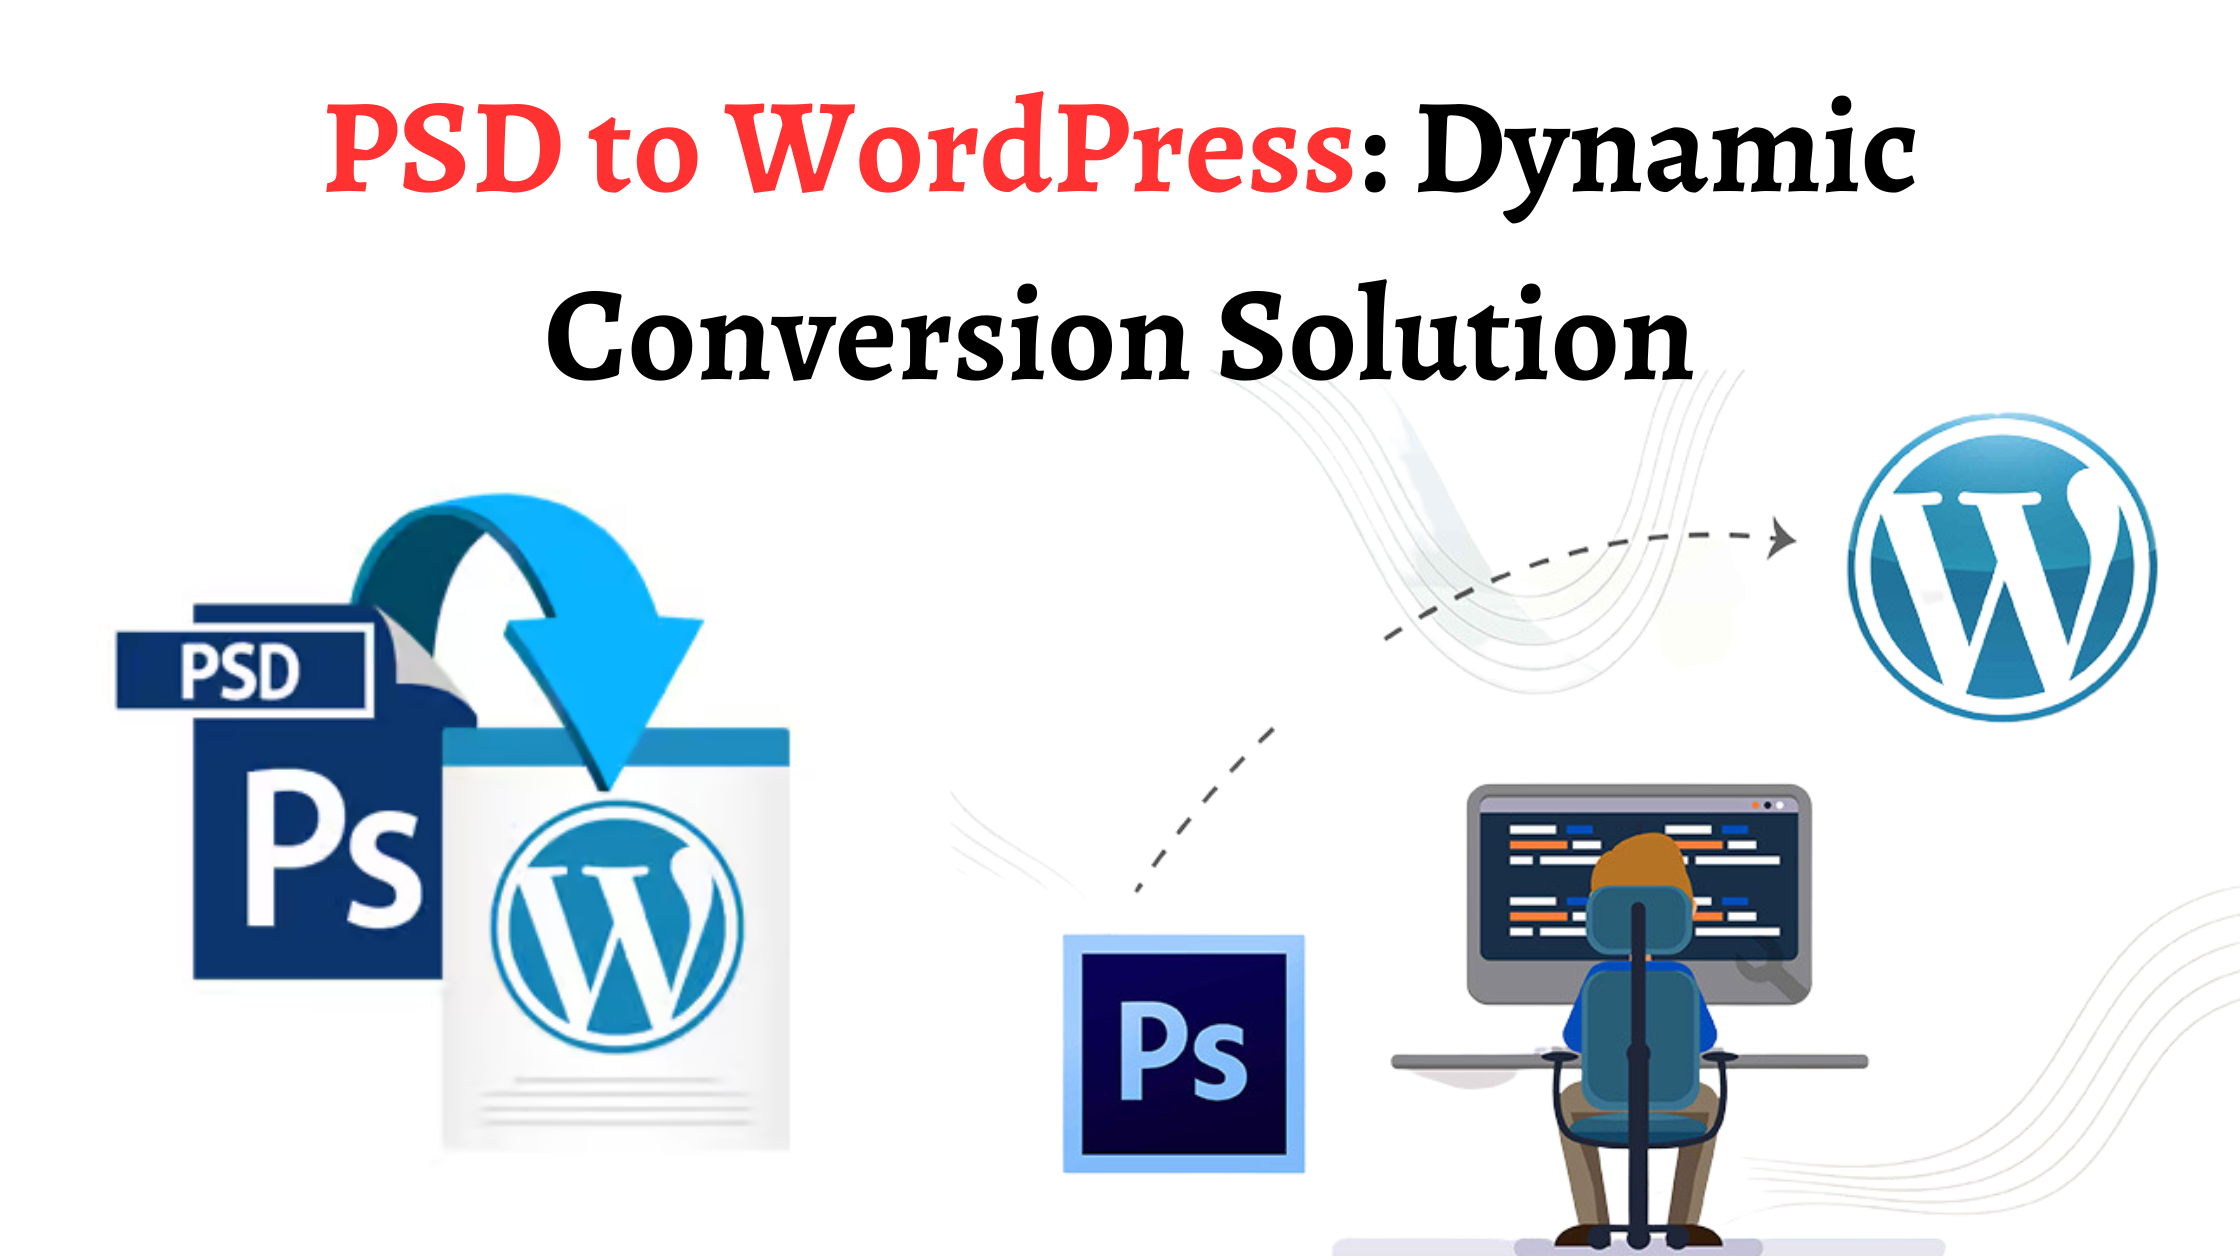 PSD to WordPress: Dynamic Conversion Solution with CSSChopper